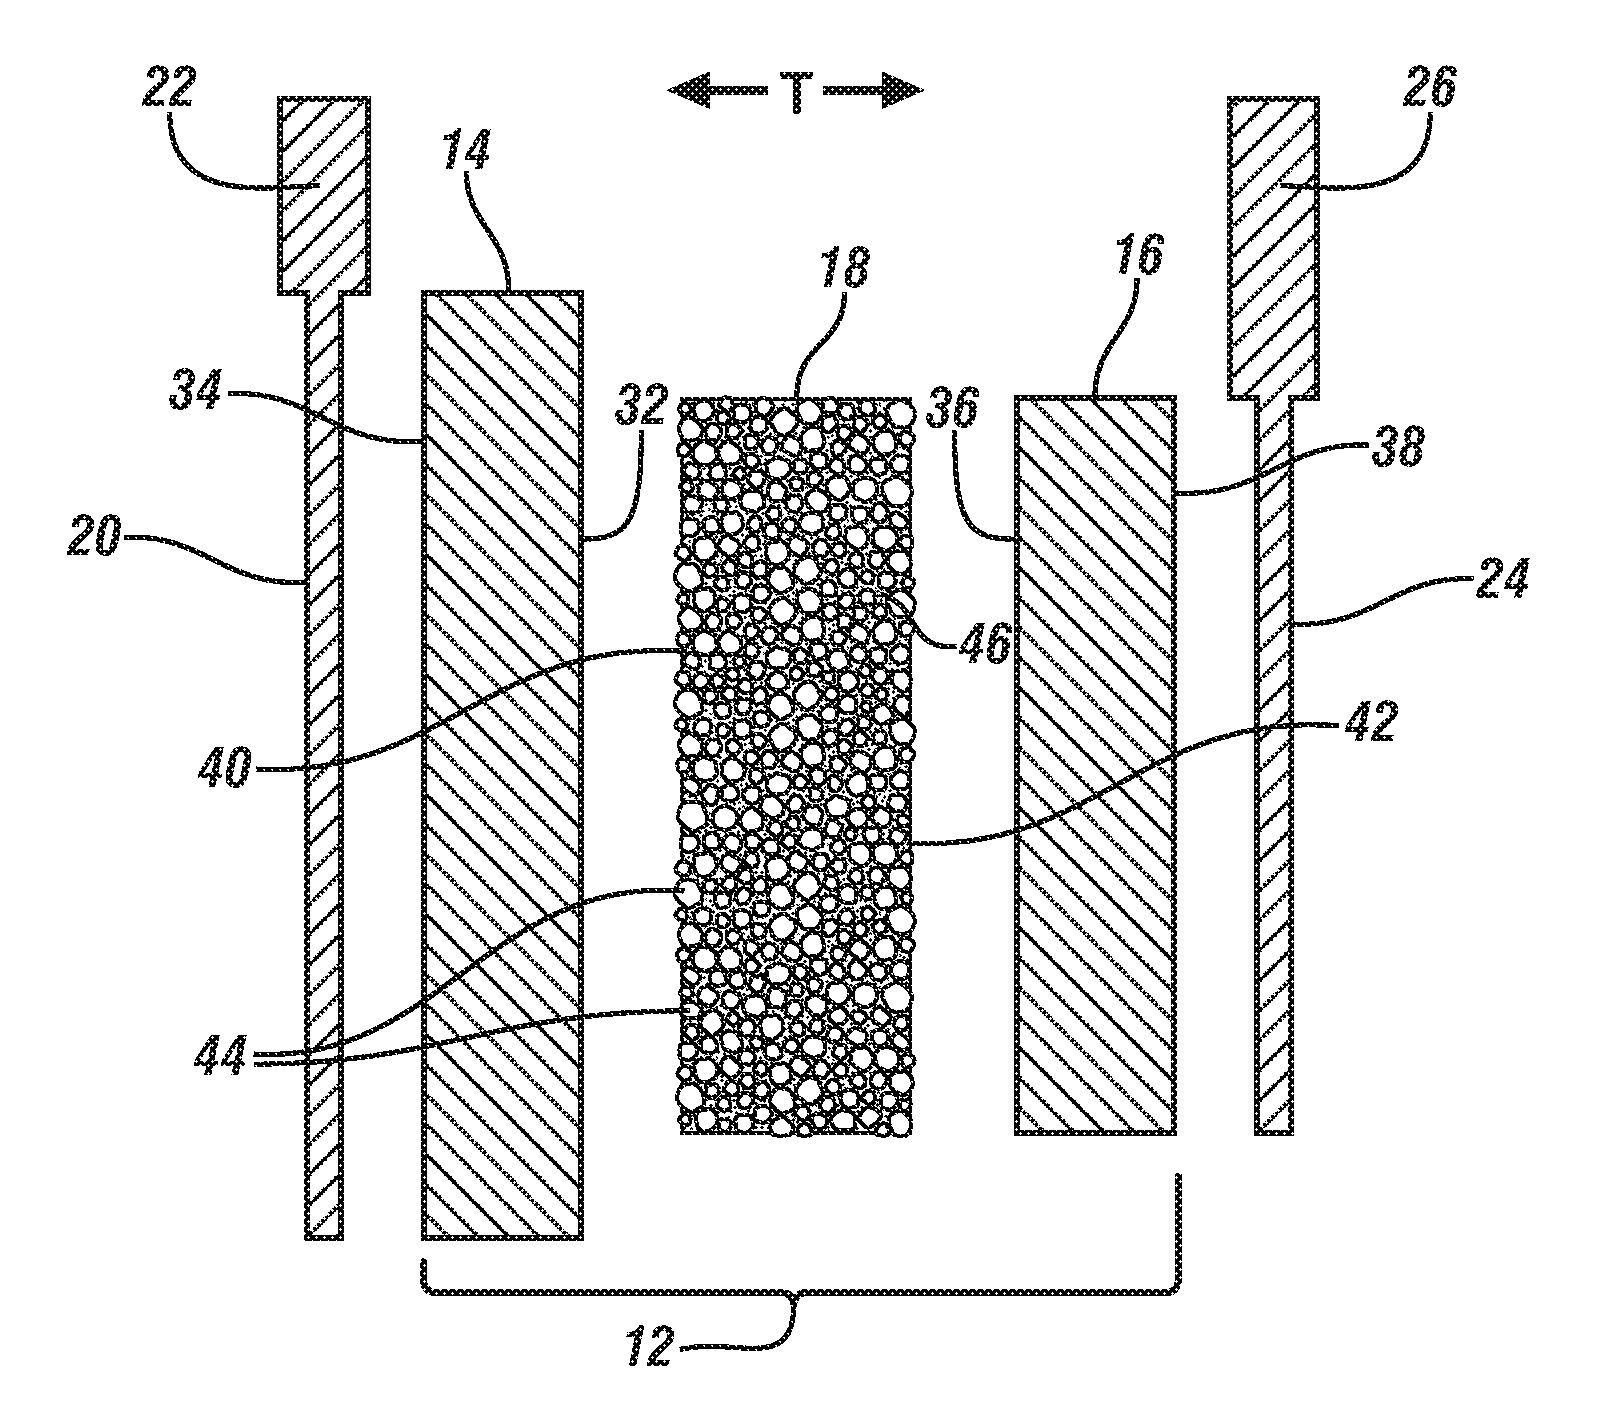 Separators for a lithium ion battery